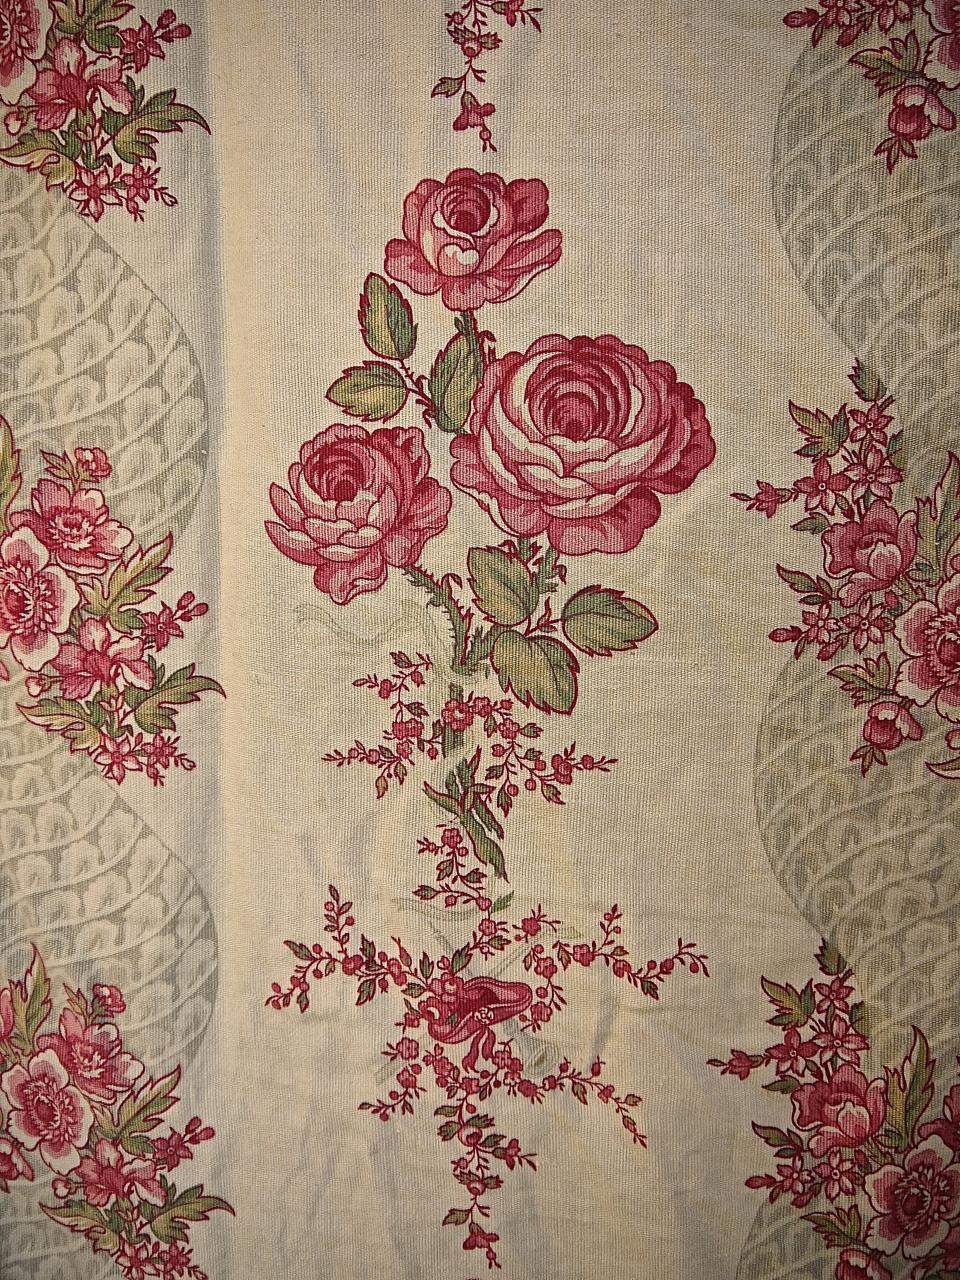 French Provincial Pair of Roses and Columns Cotton Curtains French, Late 19th Century